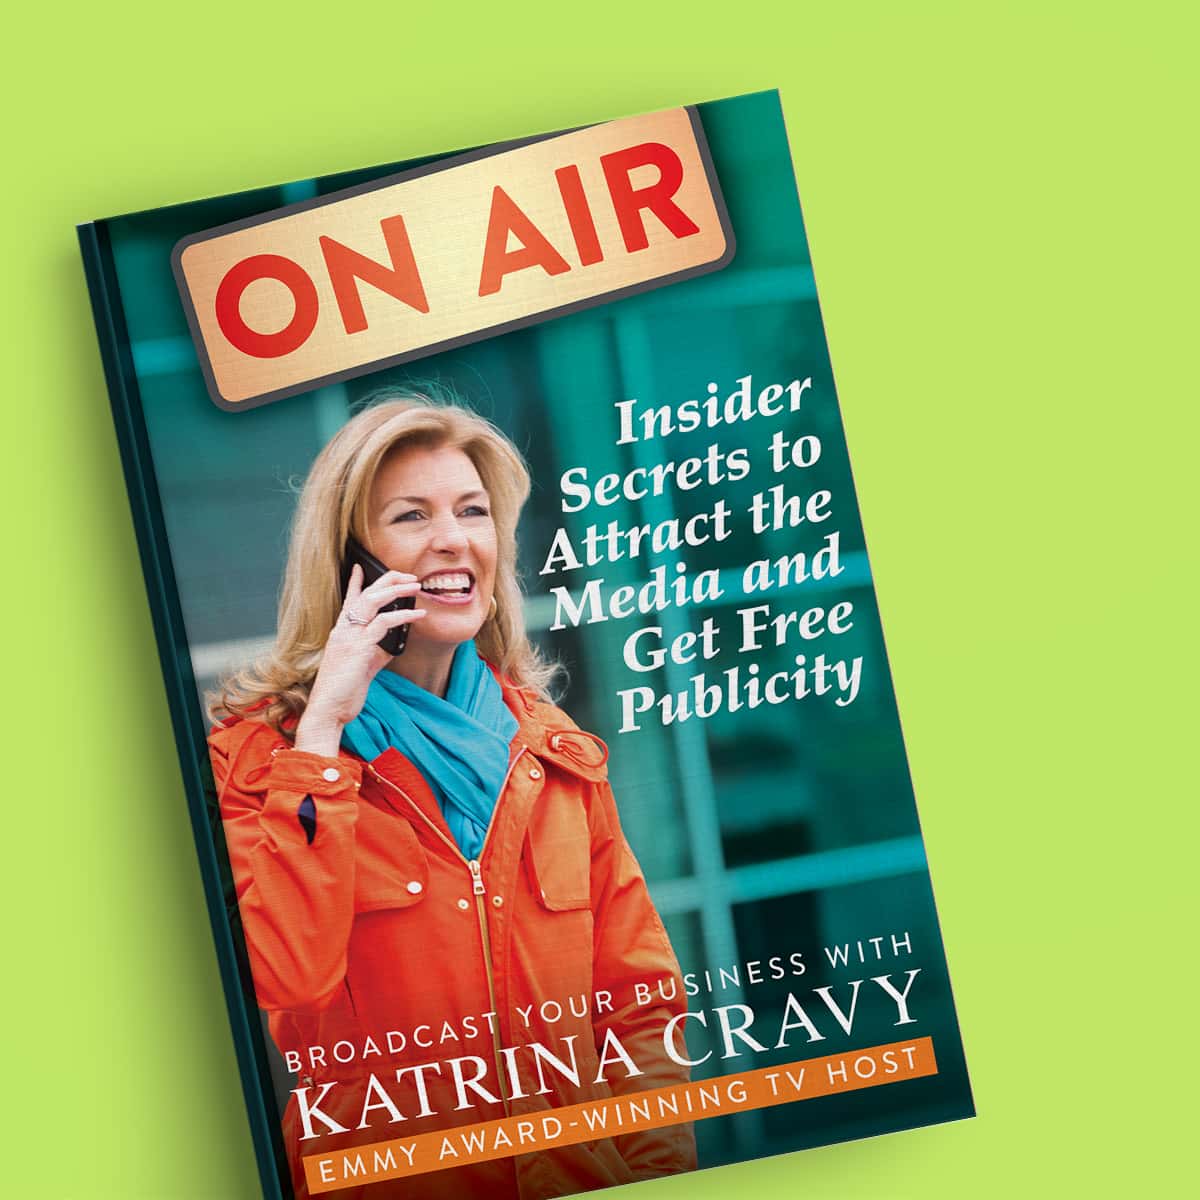 Katrina Cravy On Air Book Cover On Green Background